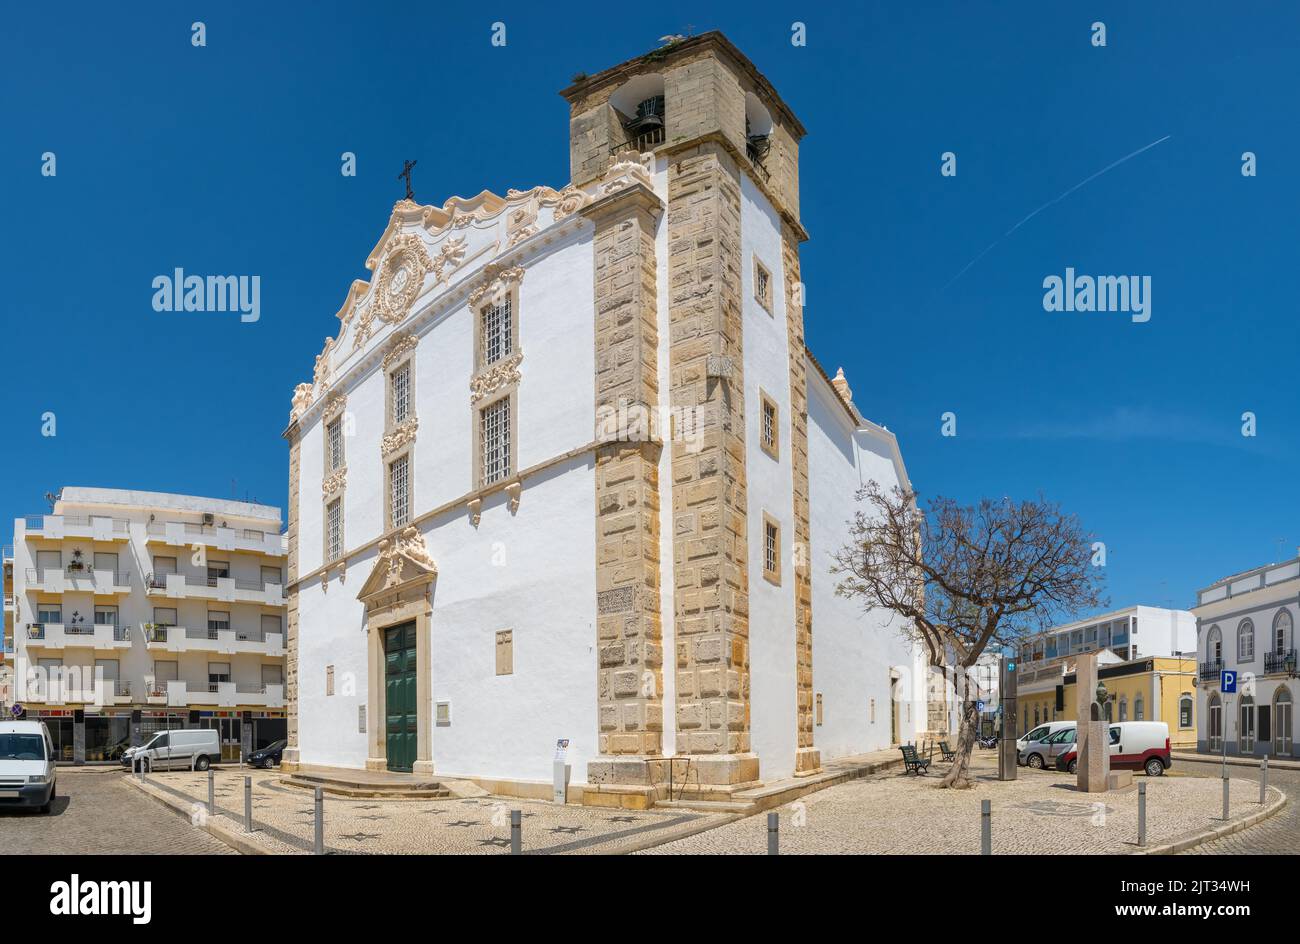 View of the main church of the city of Olhao, Portugal. Stock Photo